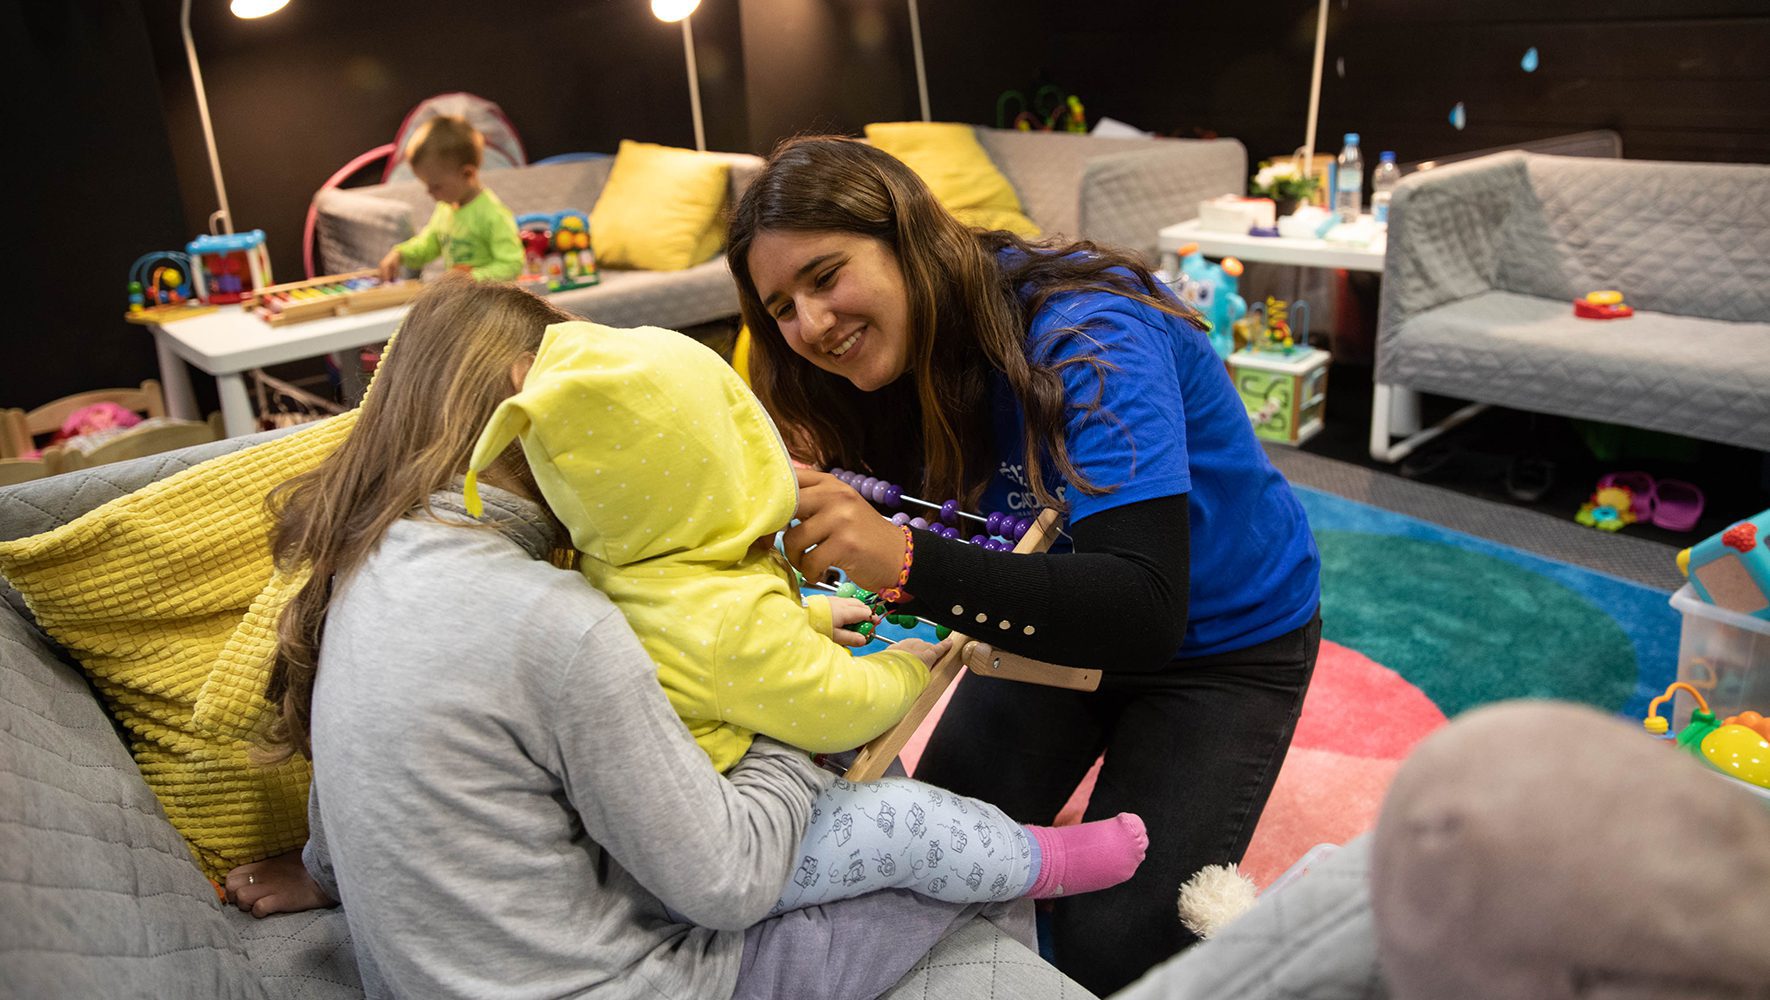 Cadena volunteer Victoria Zyman plays with children displaced by the war in Ukraine at a temporary housing center in Nadaryzn, Poland. | Community volunteer with refugees | HIAS